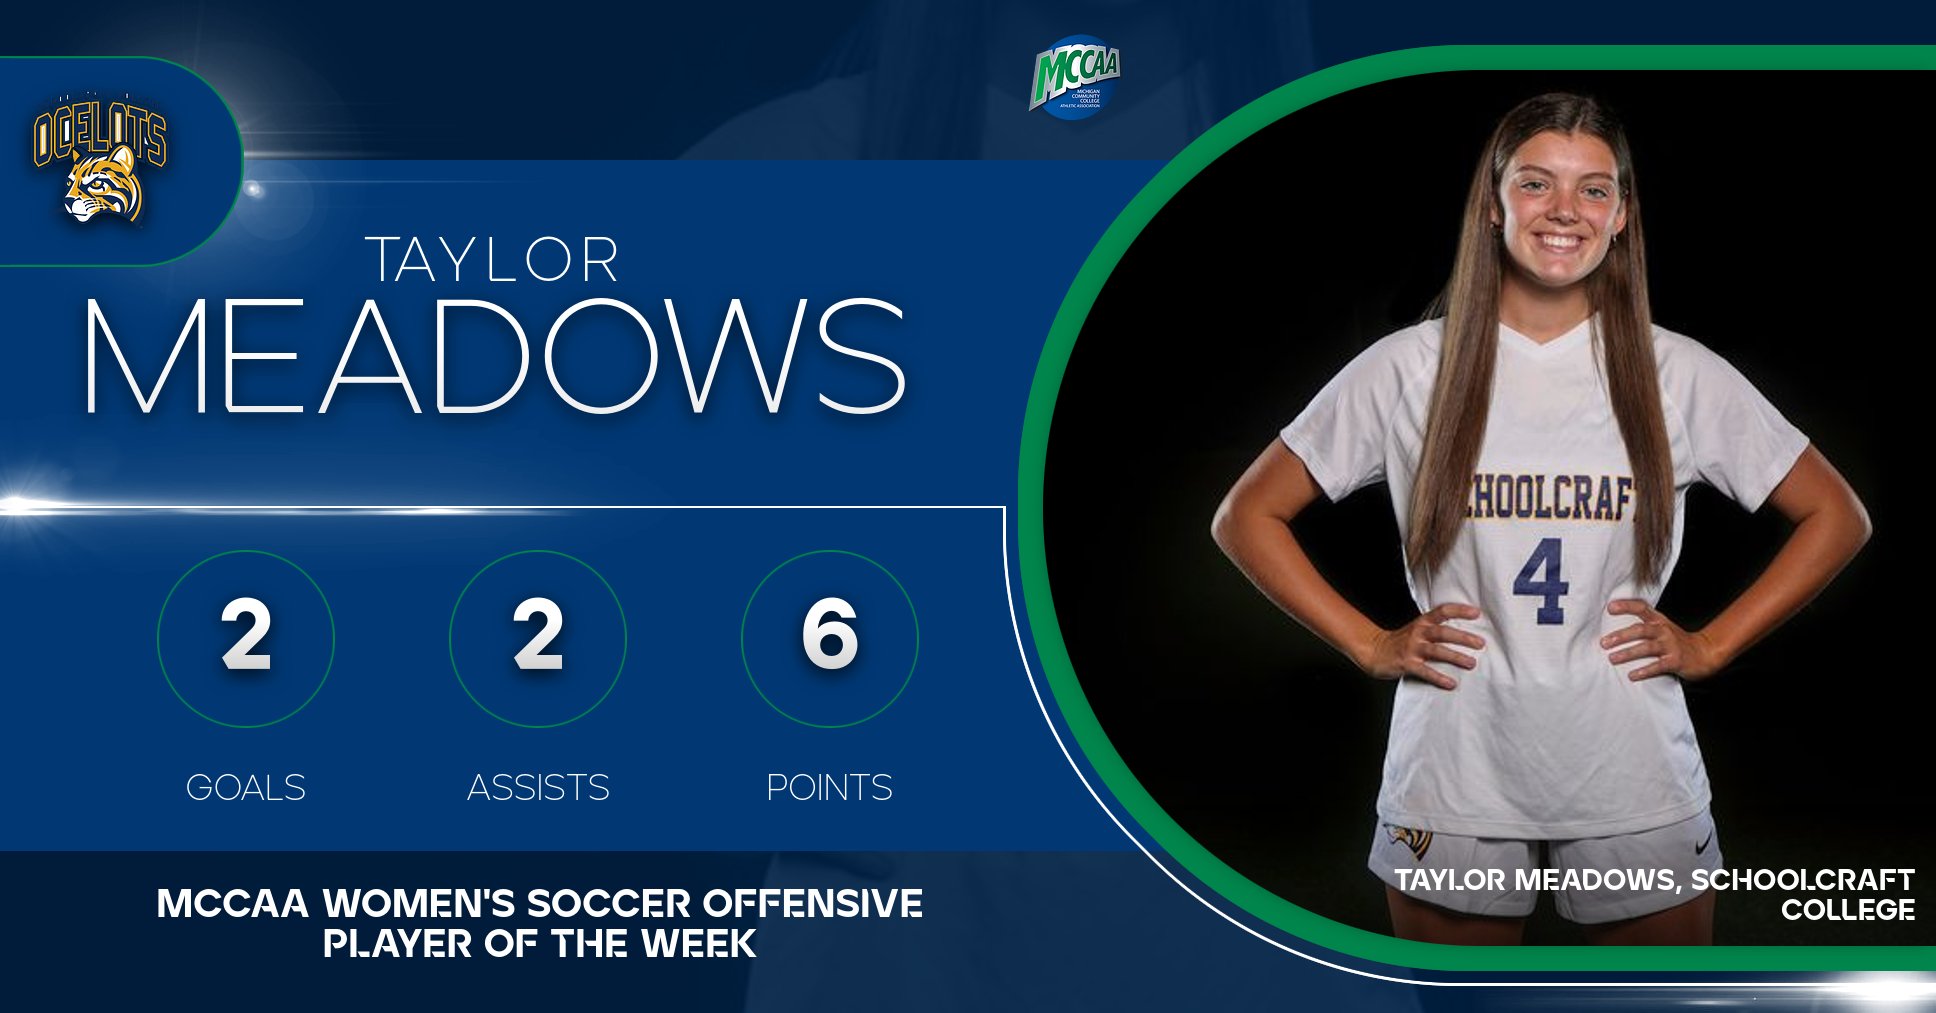 Taylor Meadows, MCCAA Women's Soccer Offensive Player of the Week, Schoolcraft College.